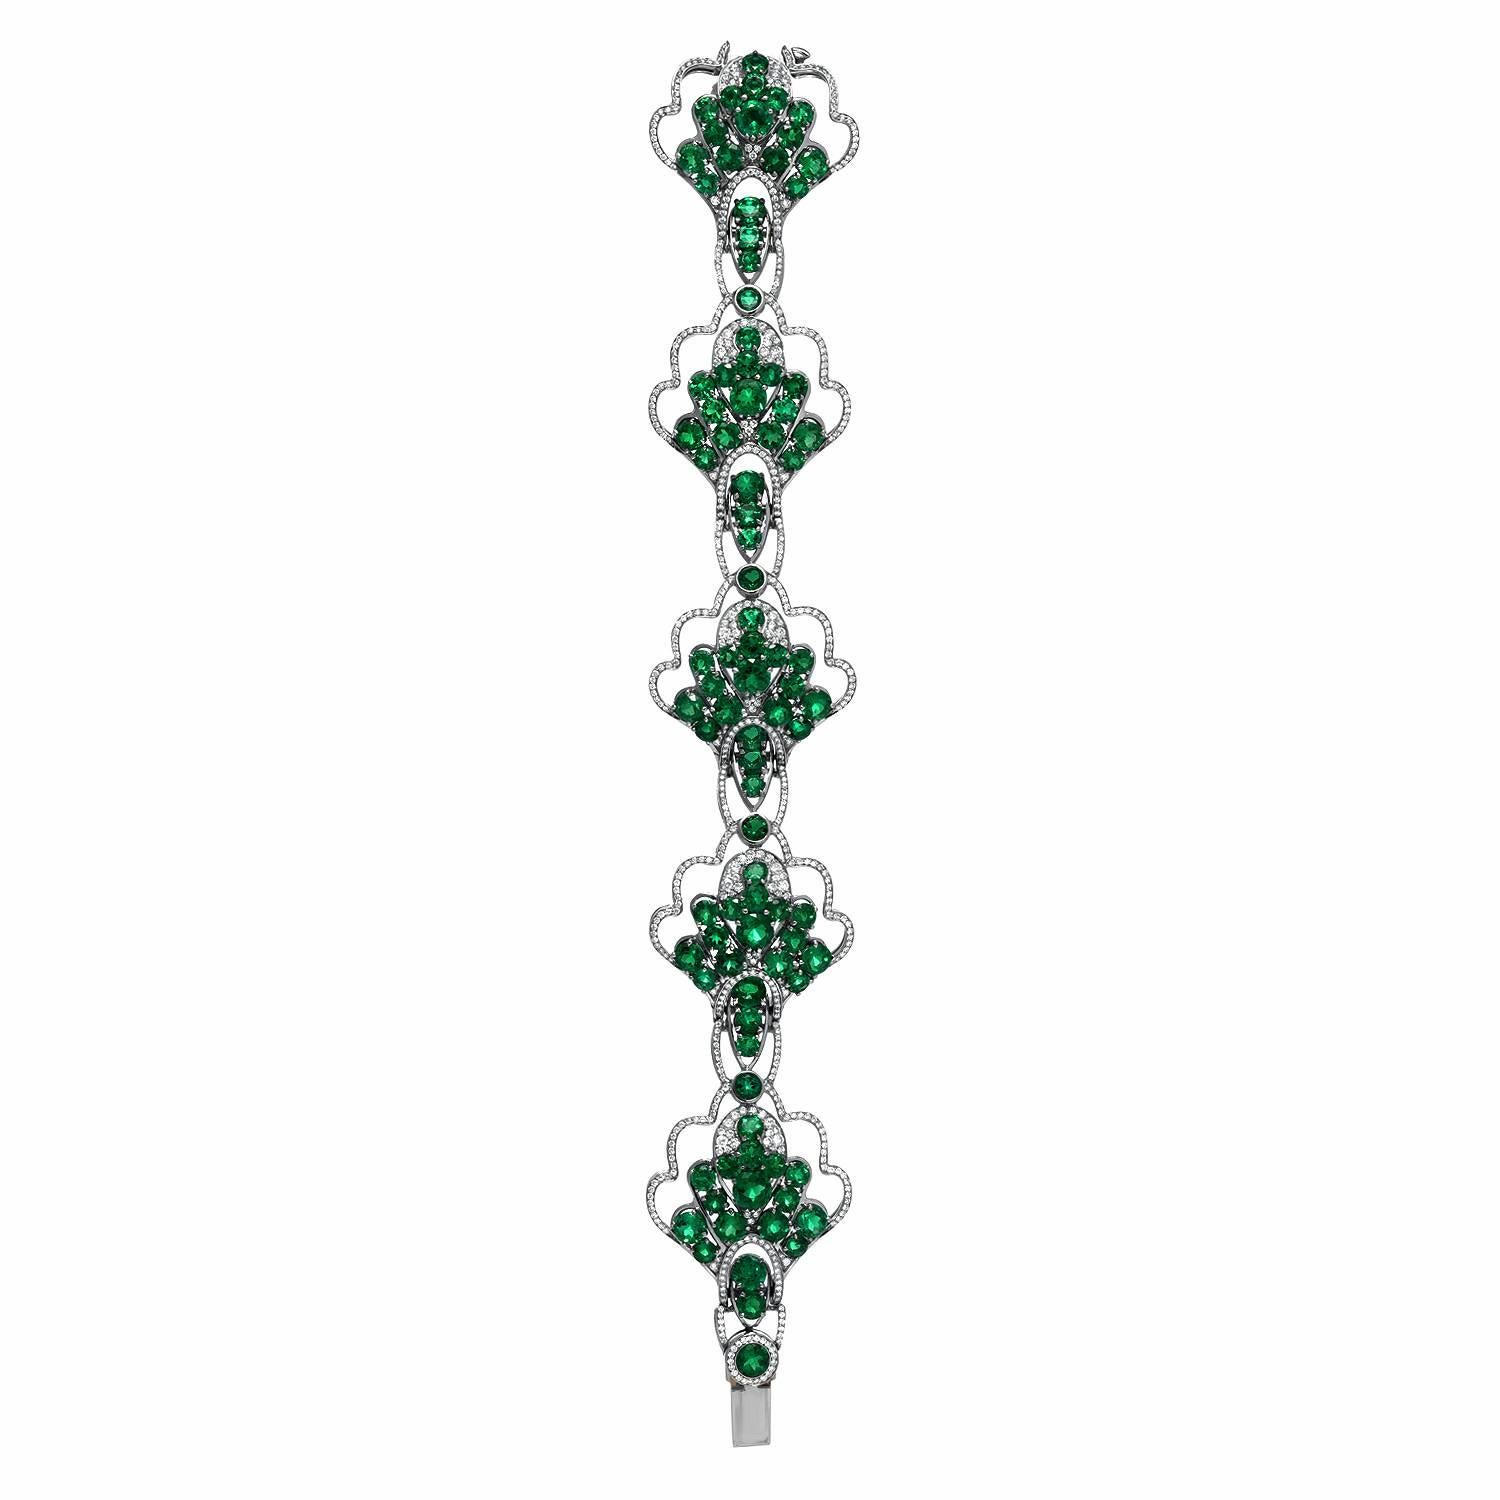 Collection quality round Colombian Emeralds weighing a total of 18.90 carats, adorned by a total of 2.28 carat E-F/VVS round brilliant diamonds, comprise this exceptional platinum bracelet.
Crafted by extremely skilled hands in the USA.
Length: 7